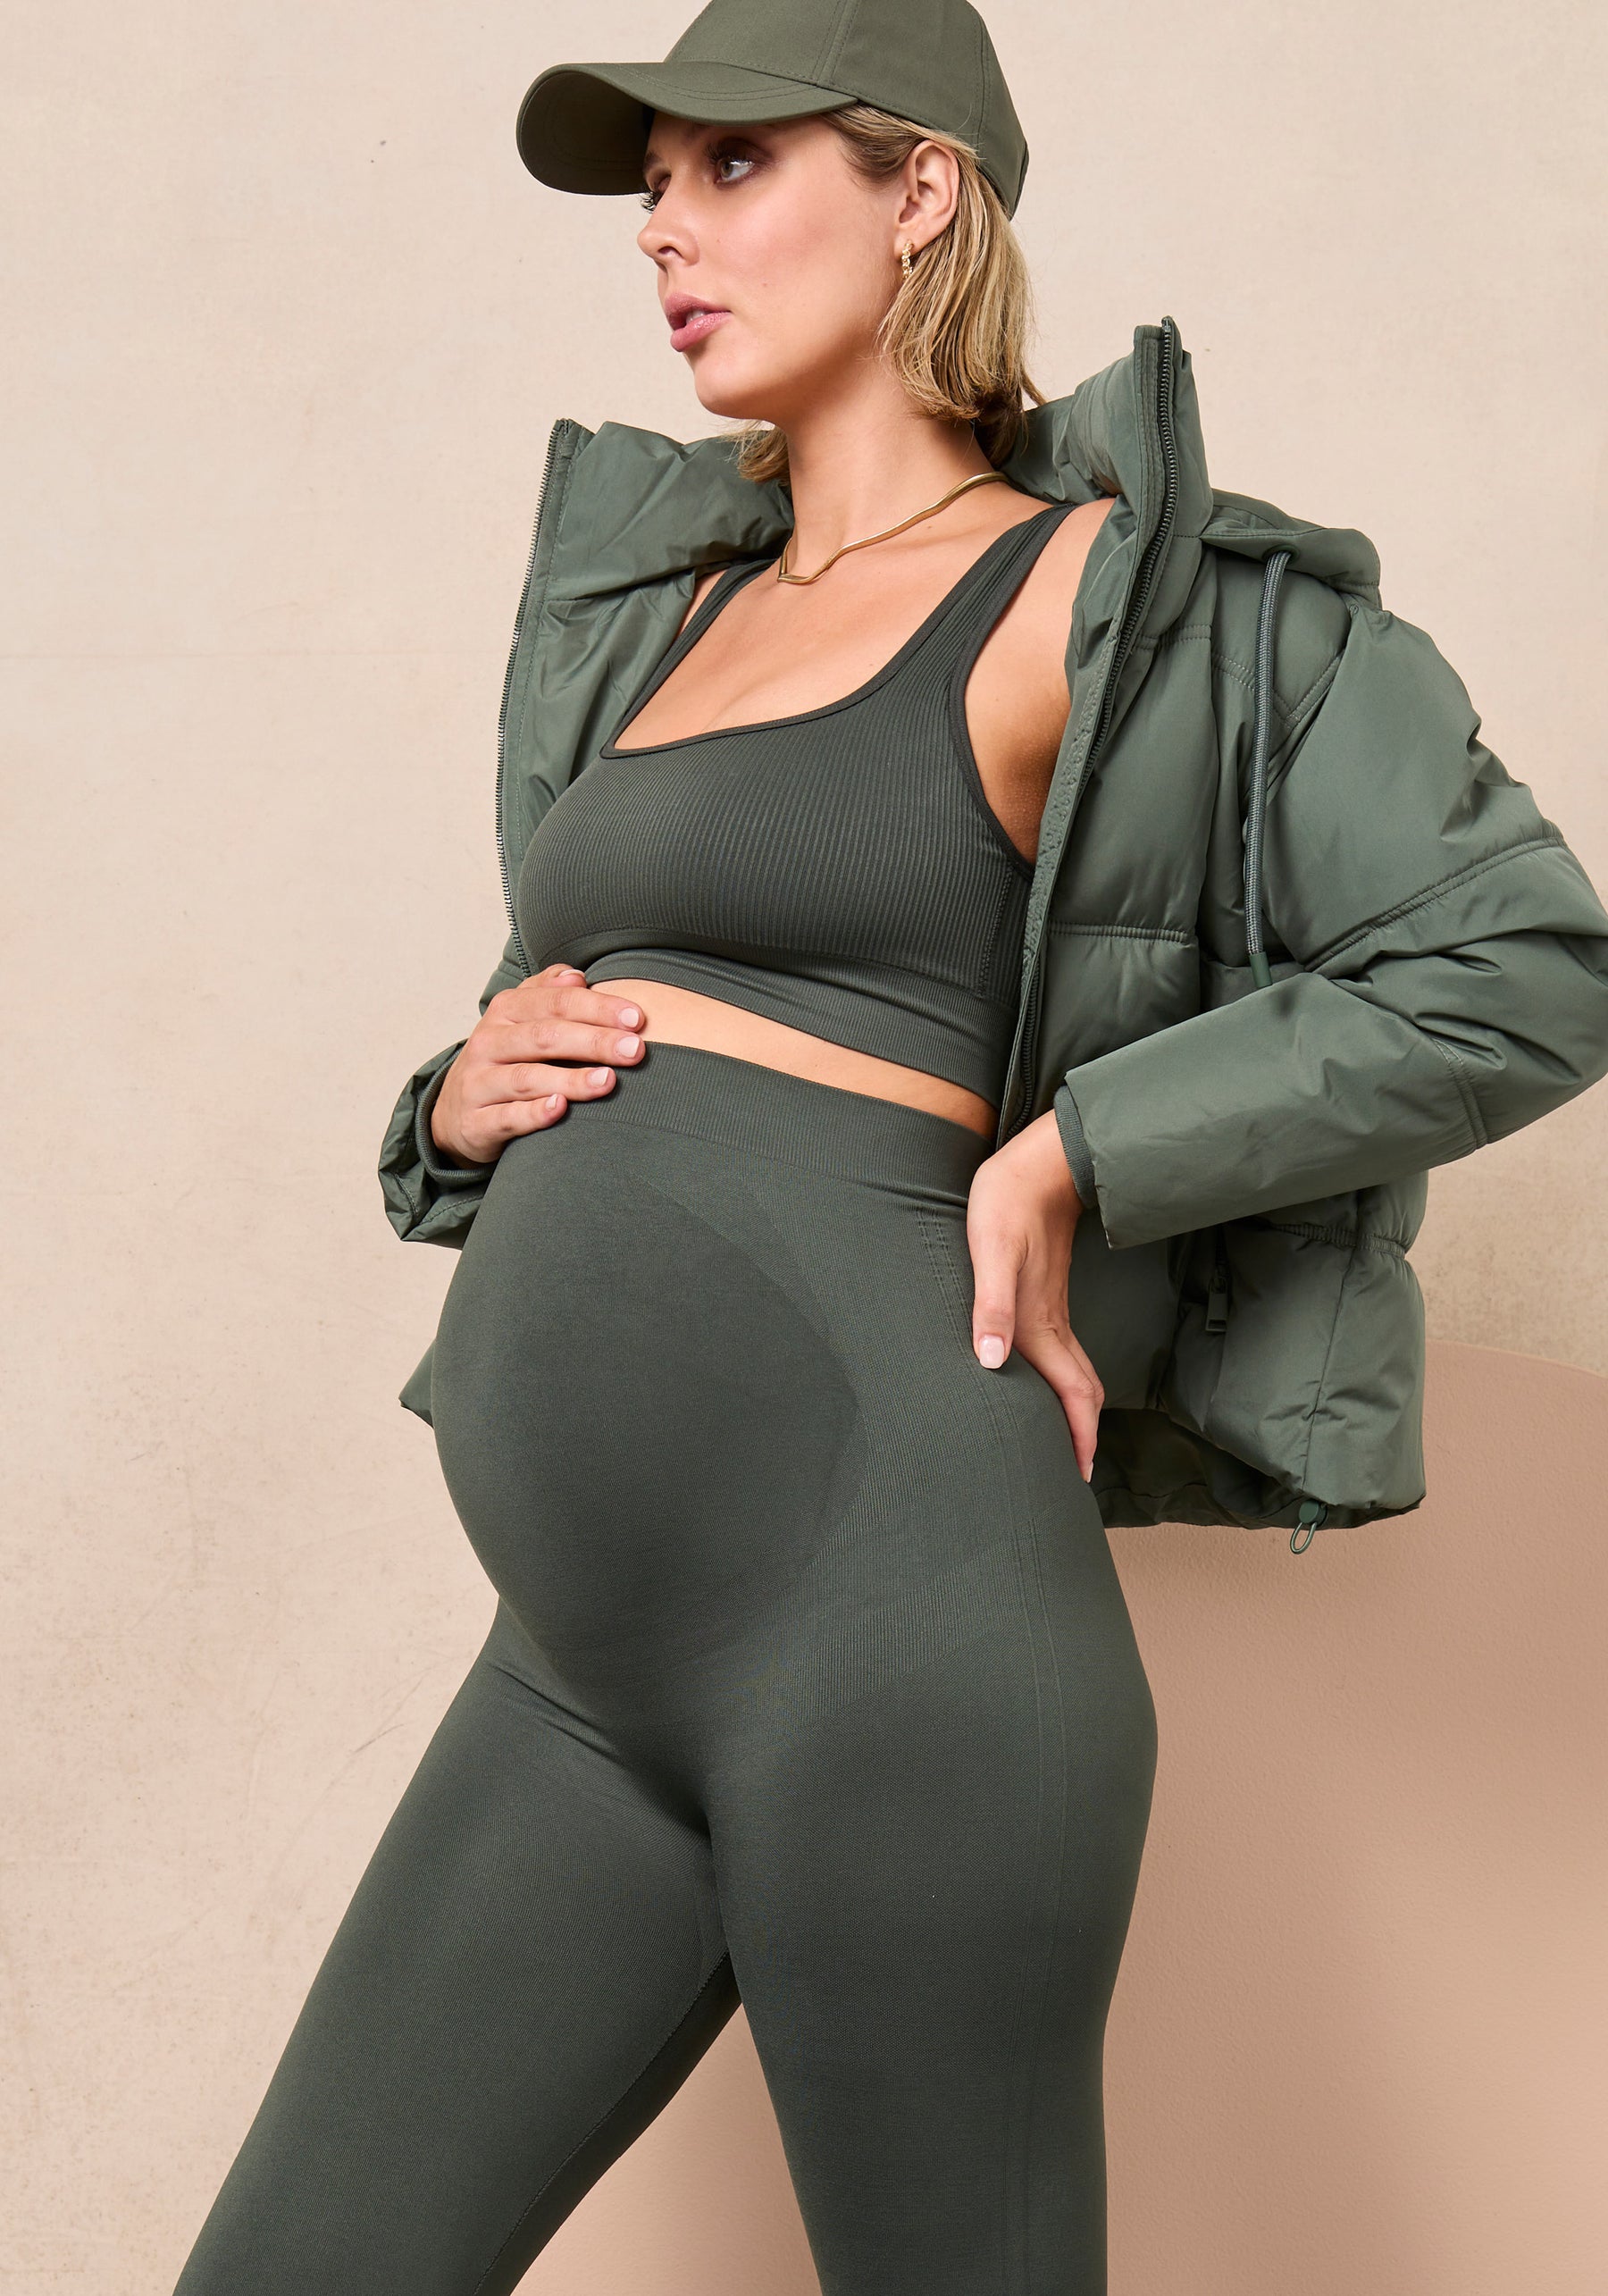 Blanqi Maternity leggings review - October 2020 Babies, Forums